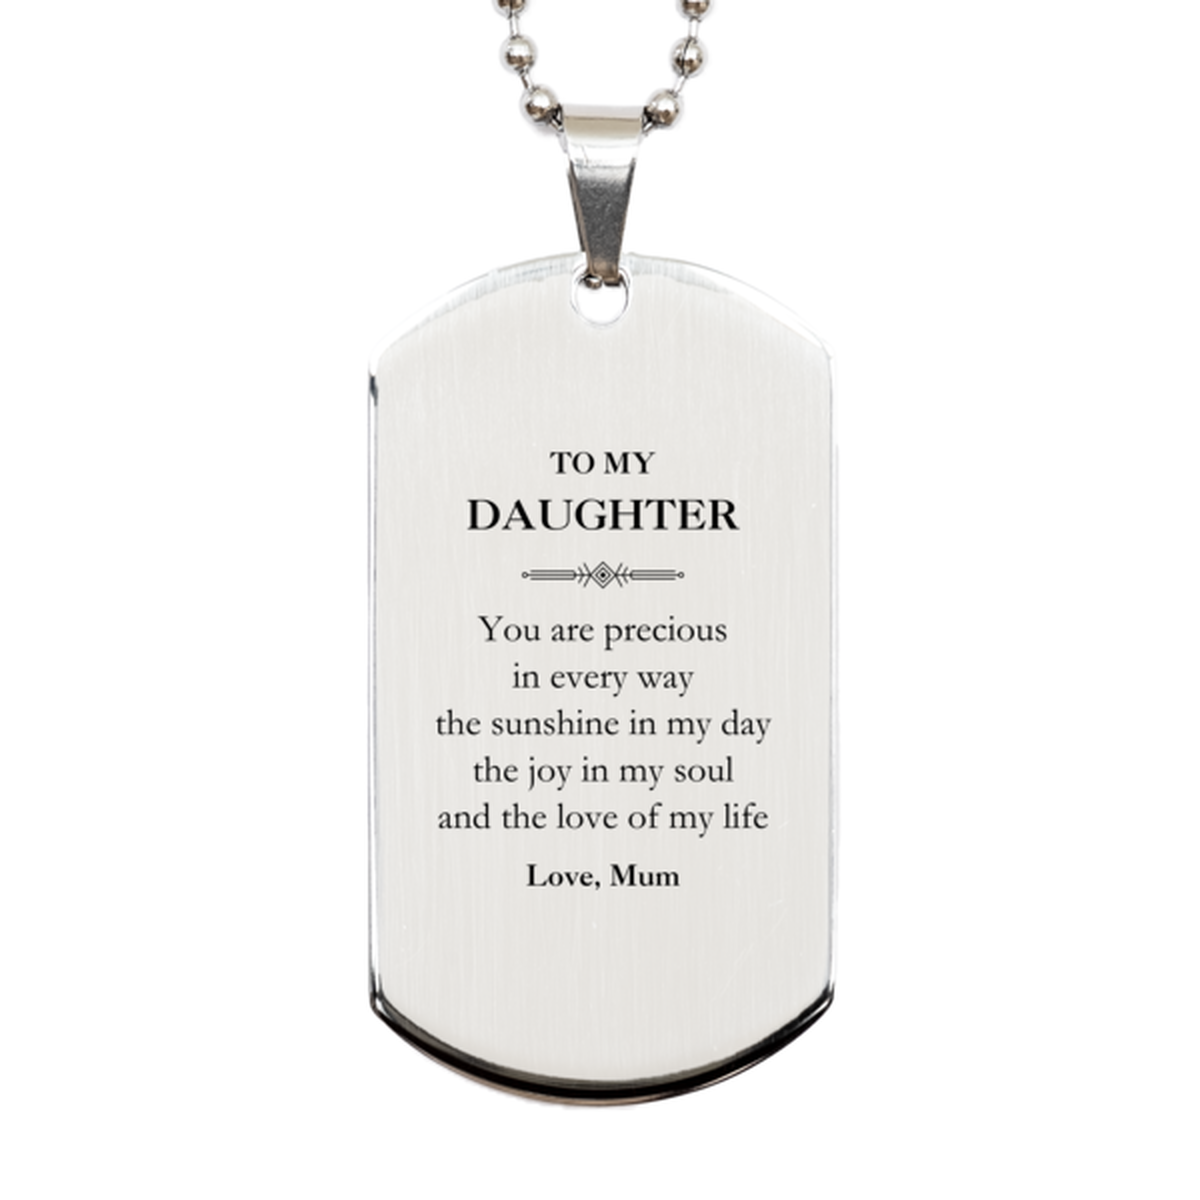 Graduation Gifts for Daughter Silver Dog Tag Present from Mum, Christmas Daughter Birthday Gifts Daughter You are precious in every way the sunshine in my day. Love, Mum